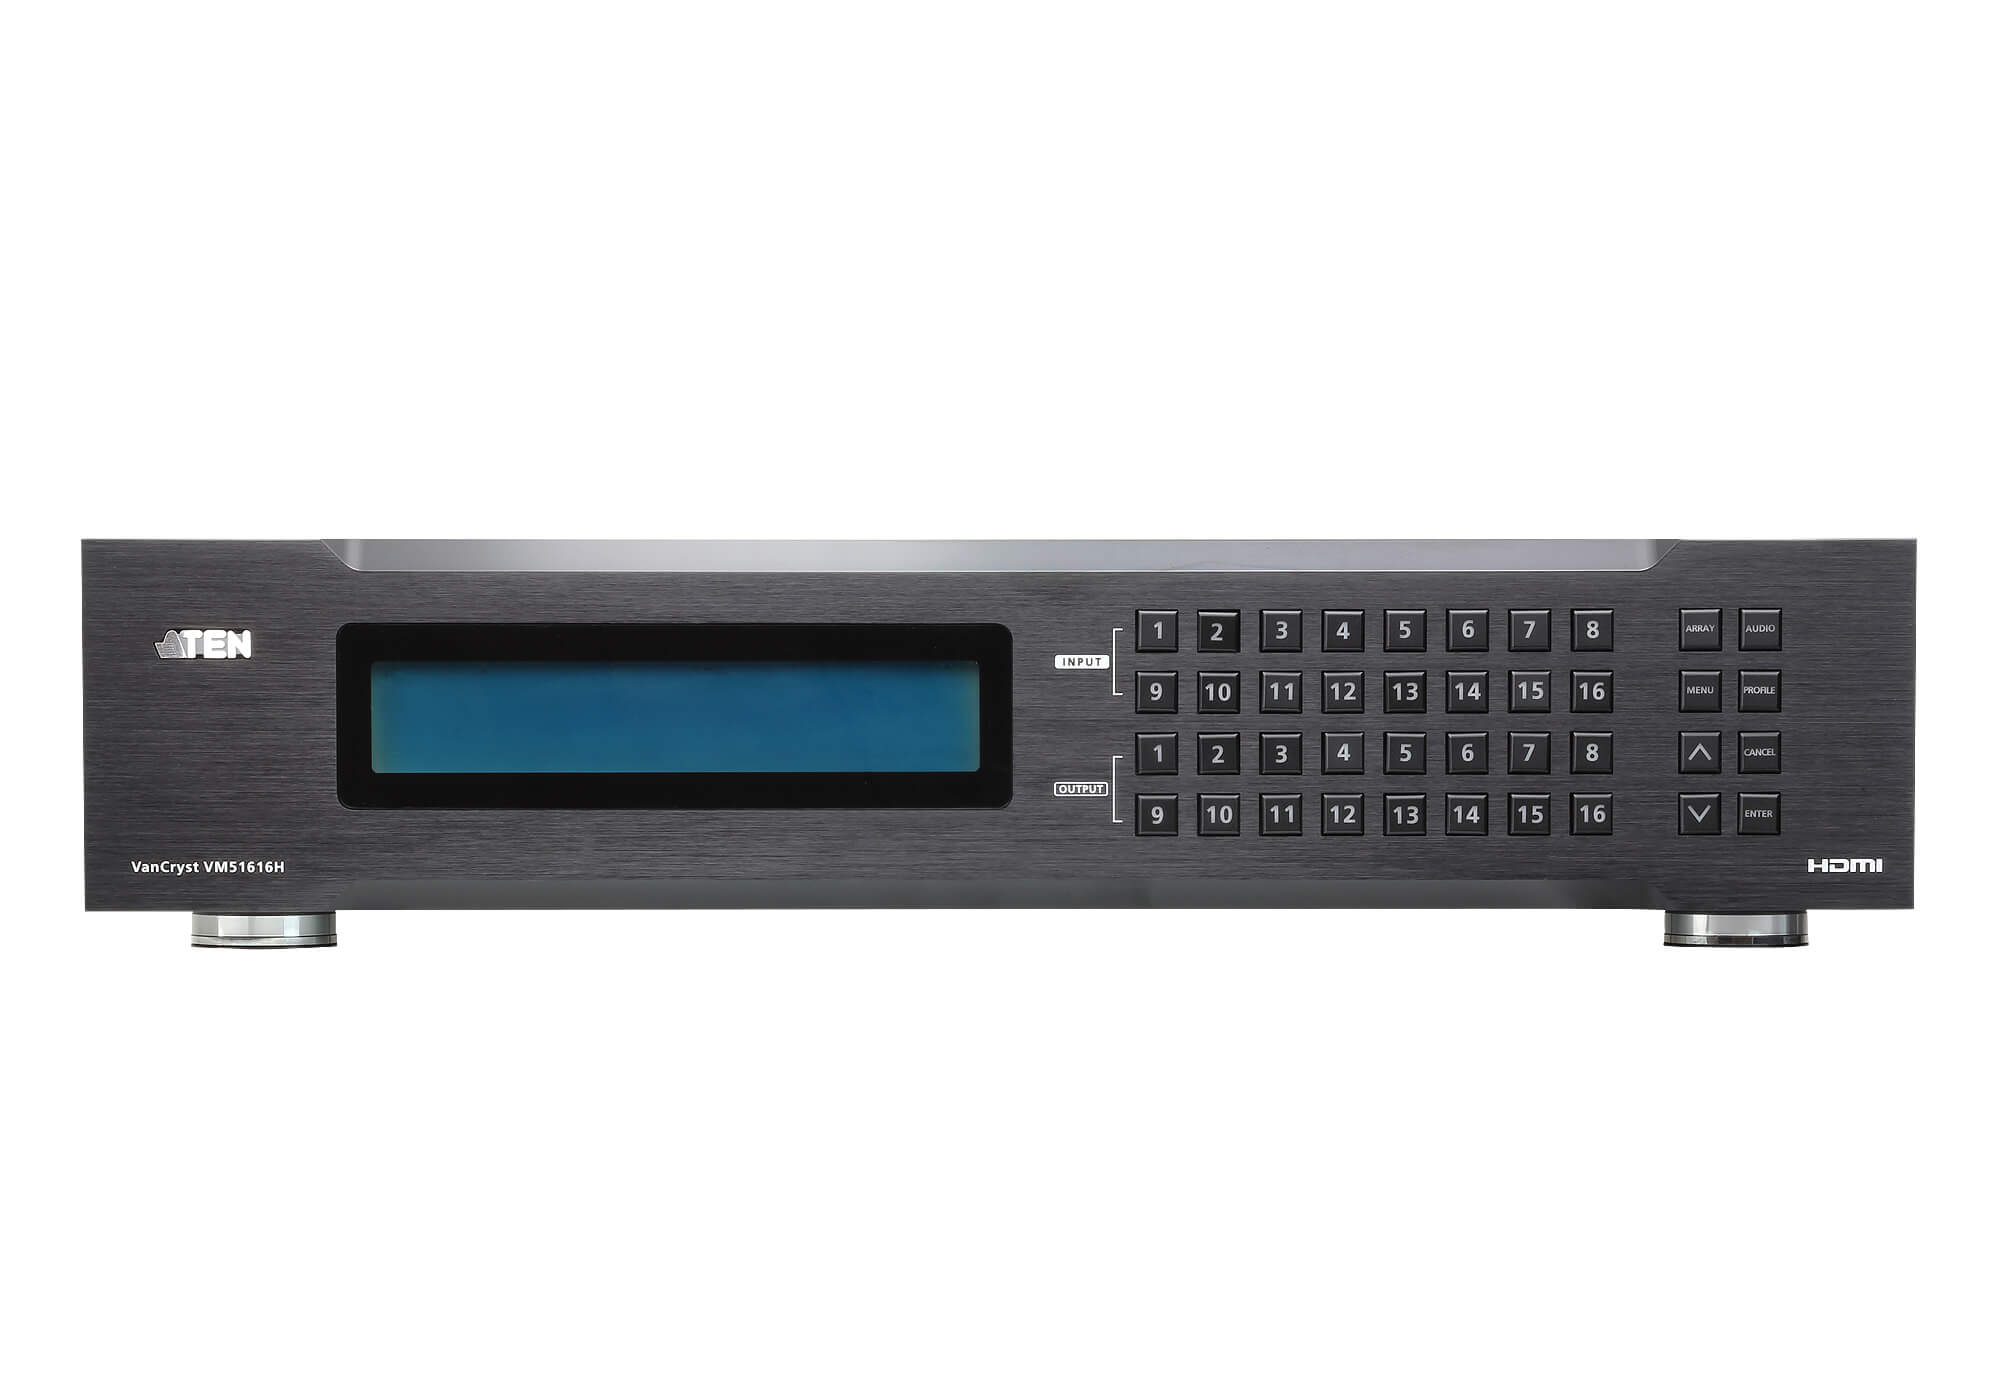 Aten Professional Matrix 16×16 HDMI Matrix with Scaler, Seamless Switch, control via front-panel pushbuttons